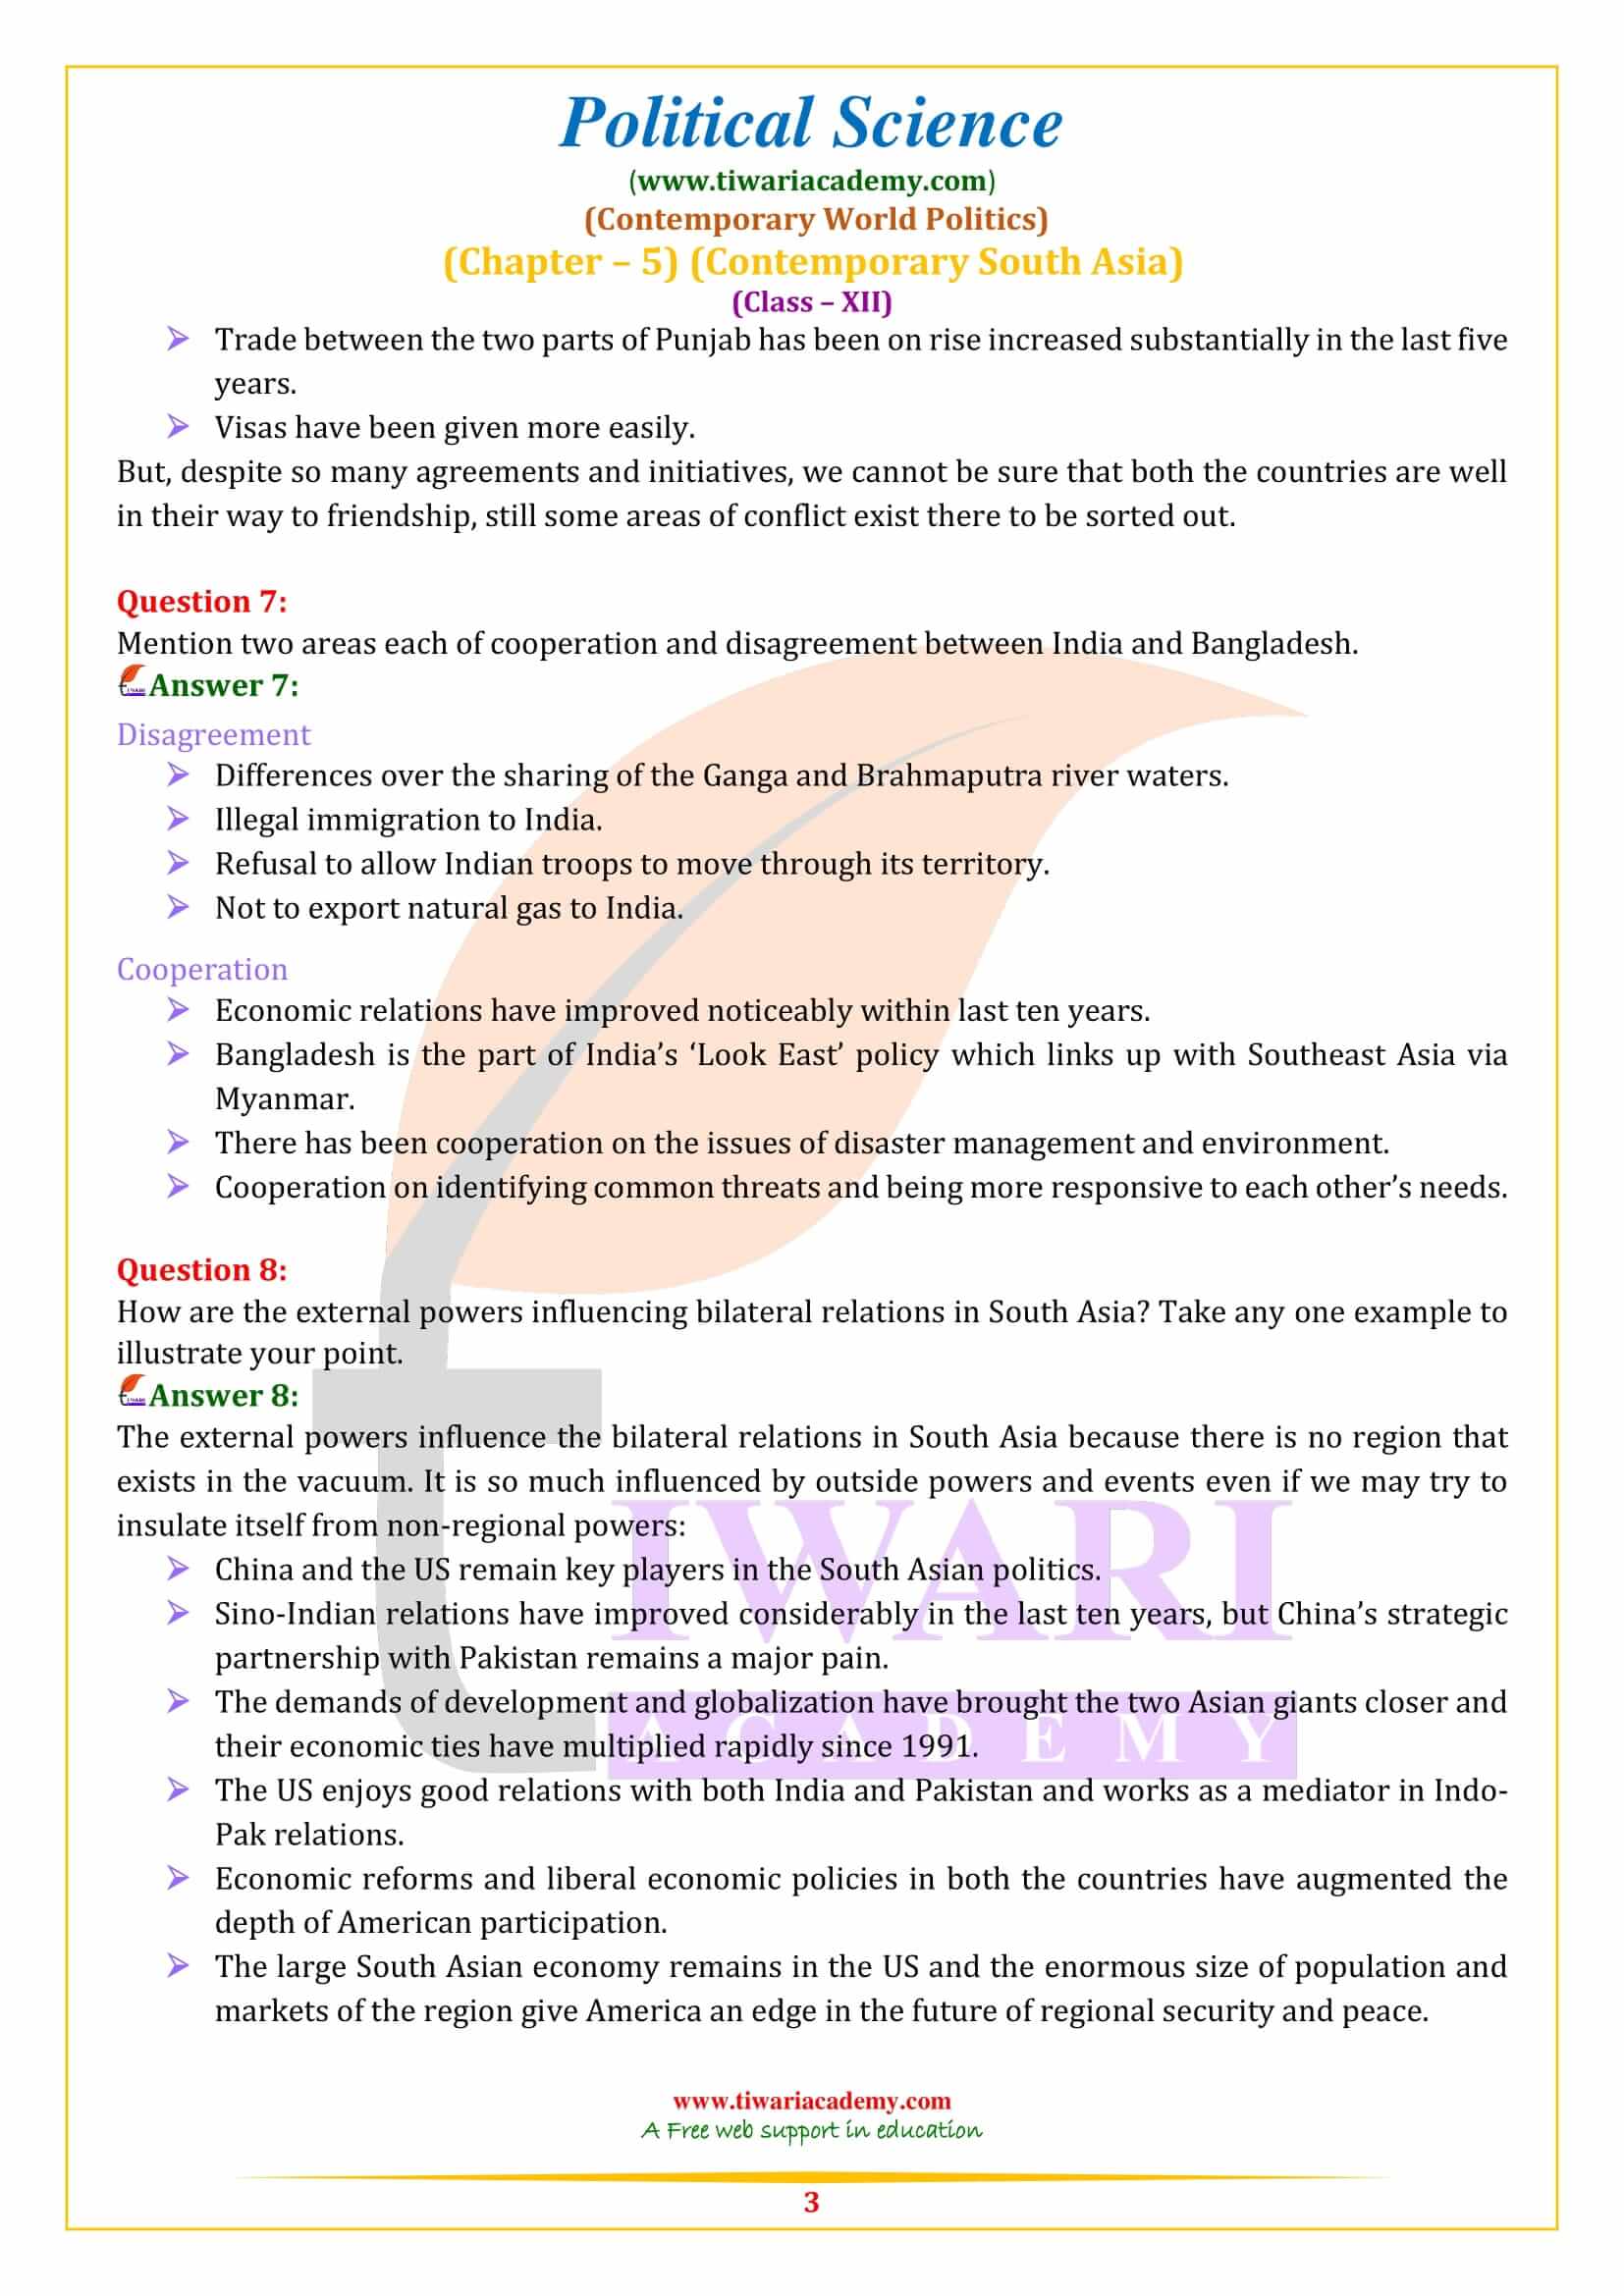 NCERT Solutions for Class 12 Political Science Chapter 5 in English Medium